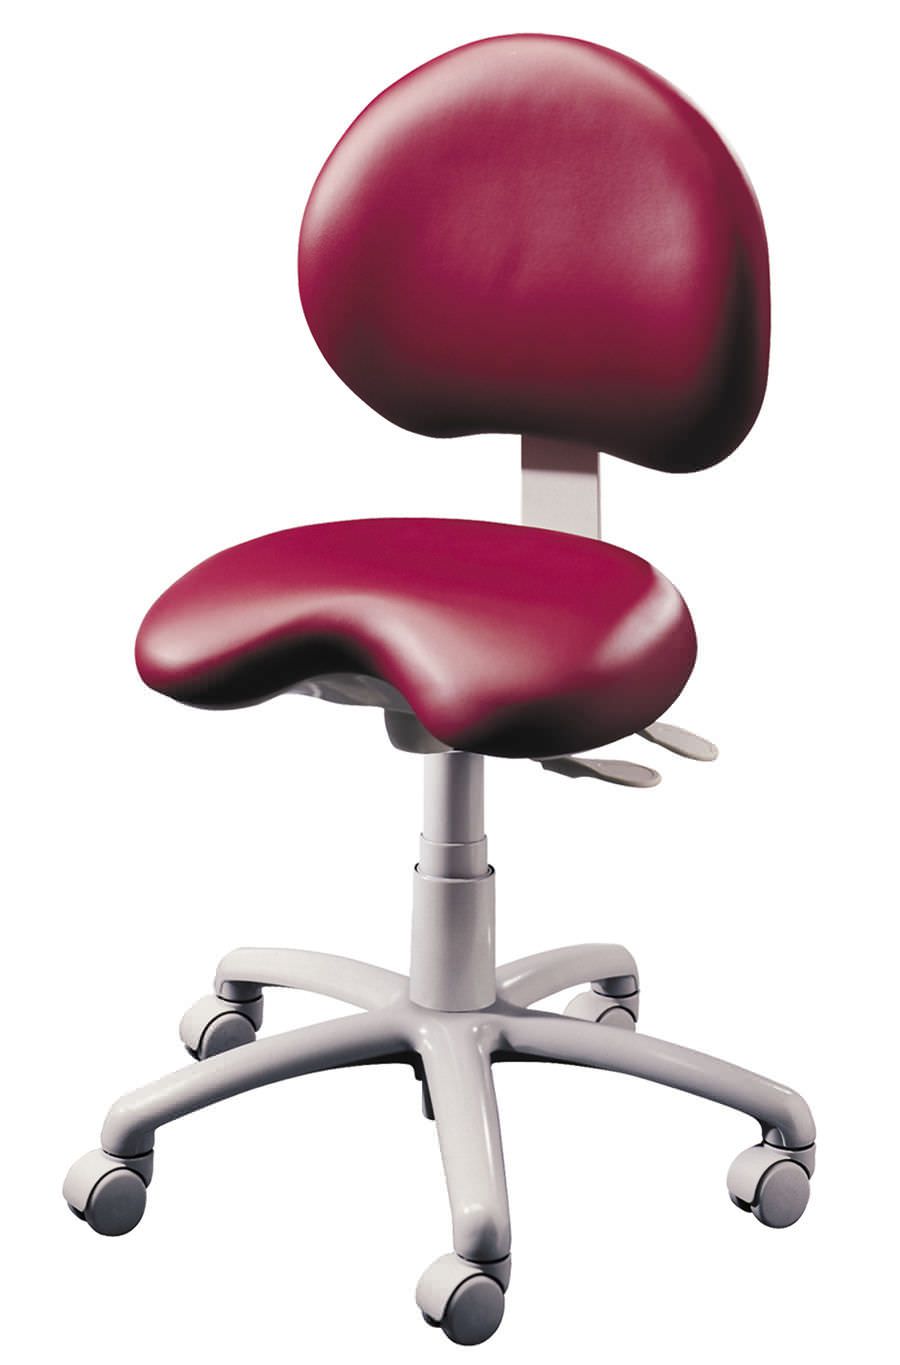 Dental stool / on casters / height-adjustable / with backrest 9000 Brewer Company (The)